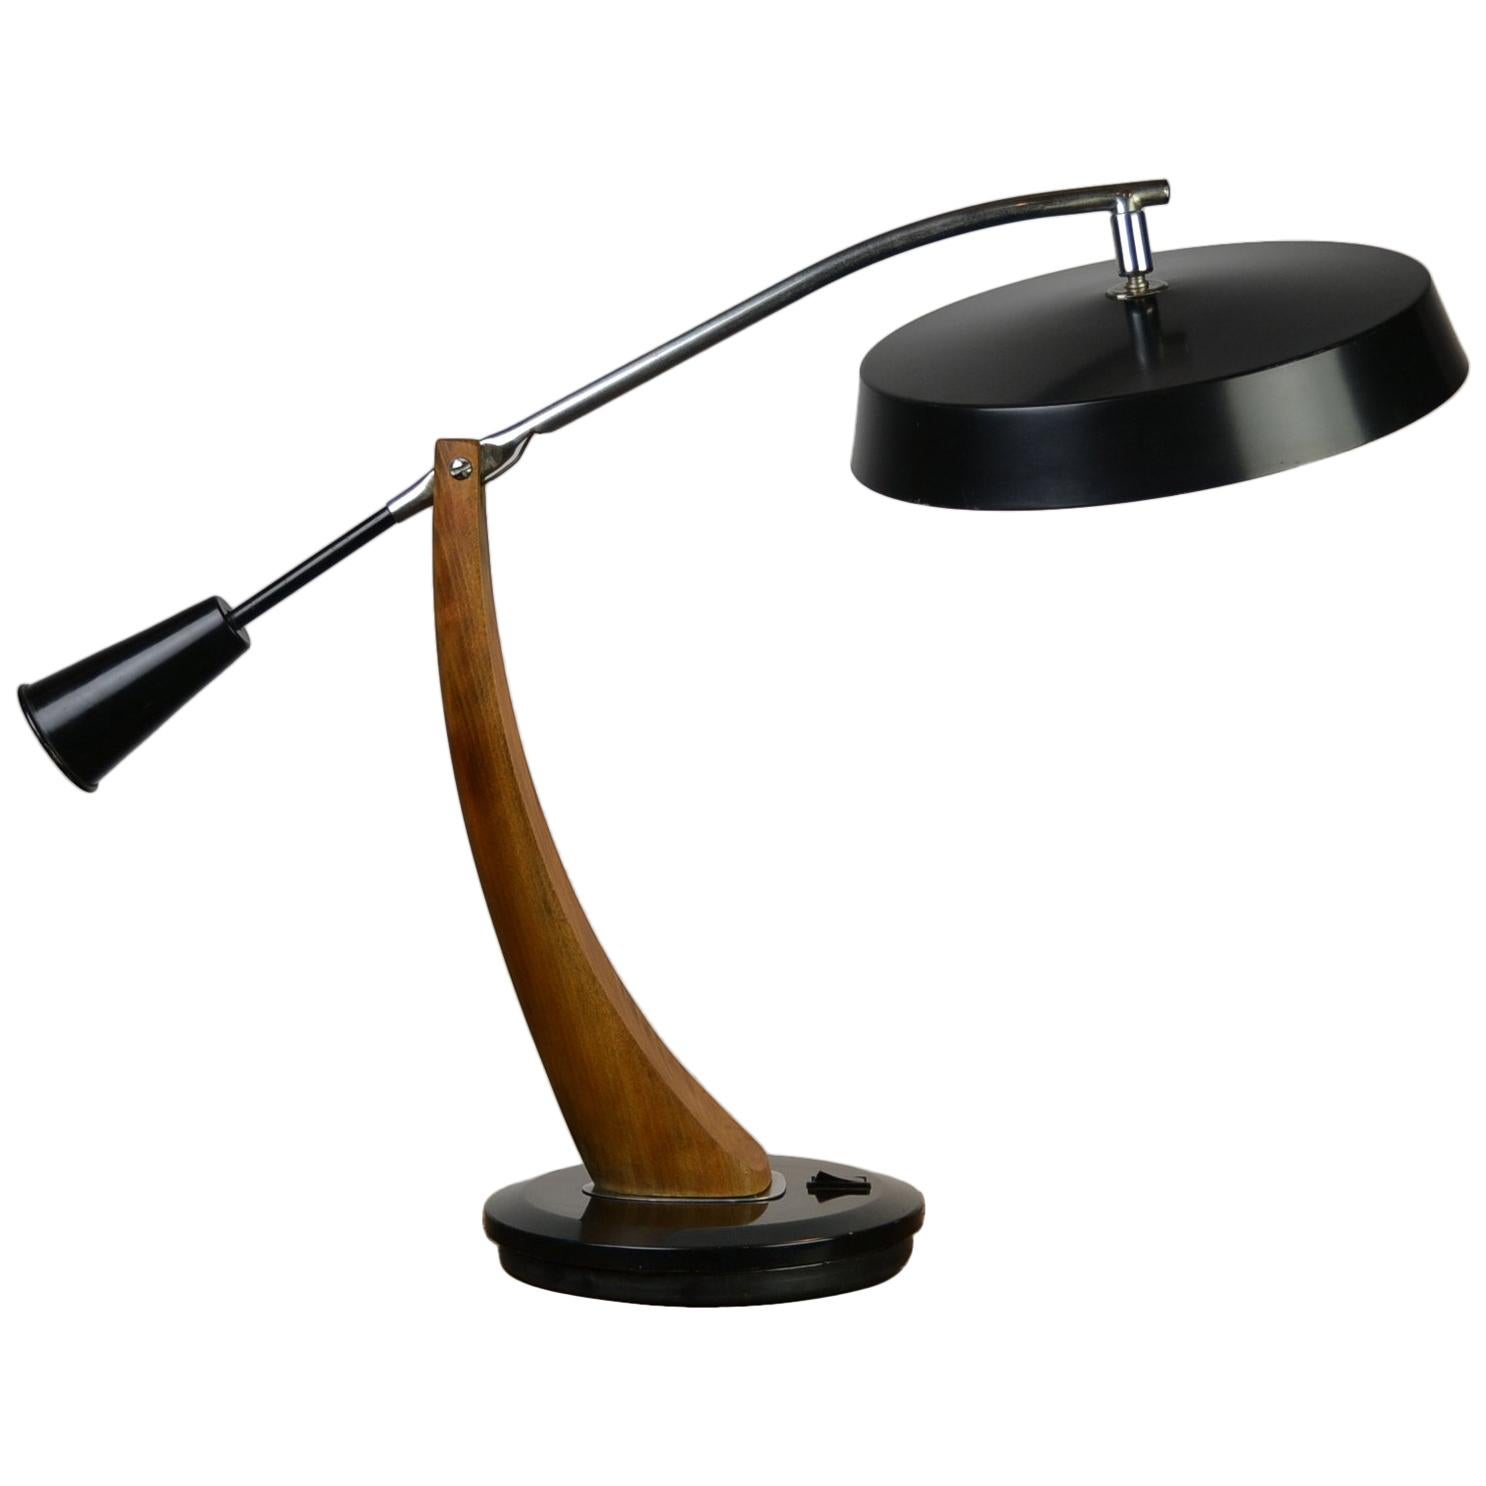 1960s Desk Lamp, Black Laquered Metal and Wood, Fase Madrid, Spain